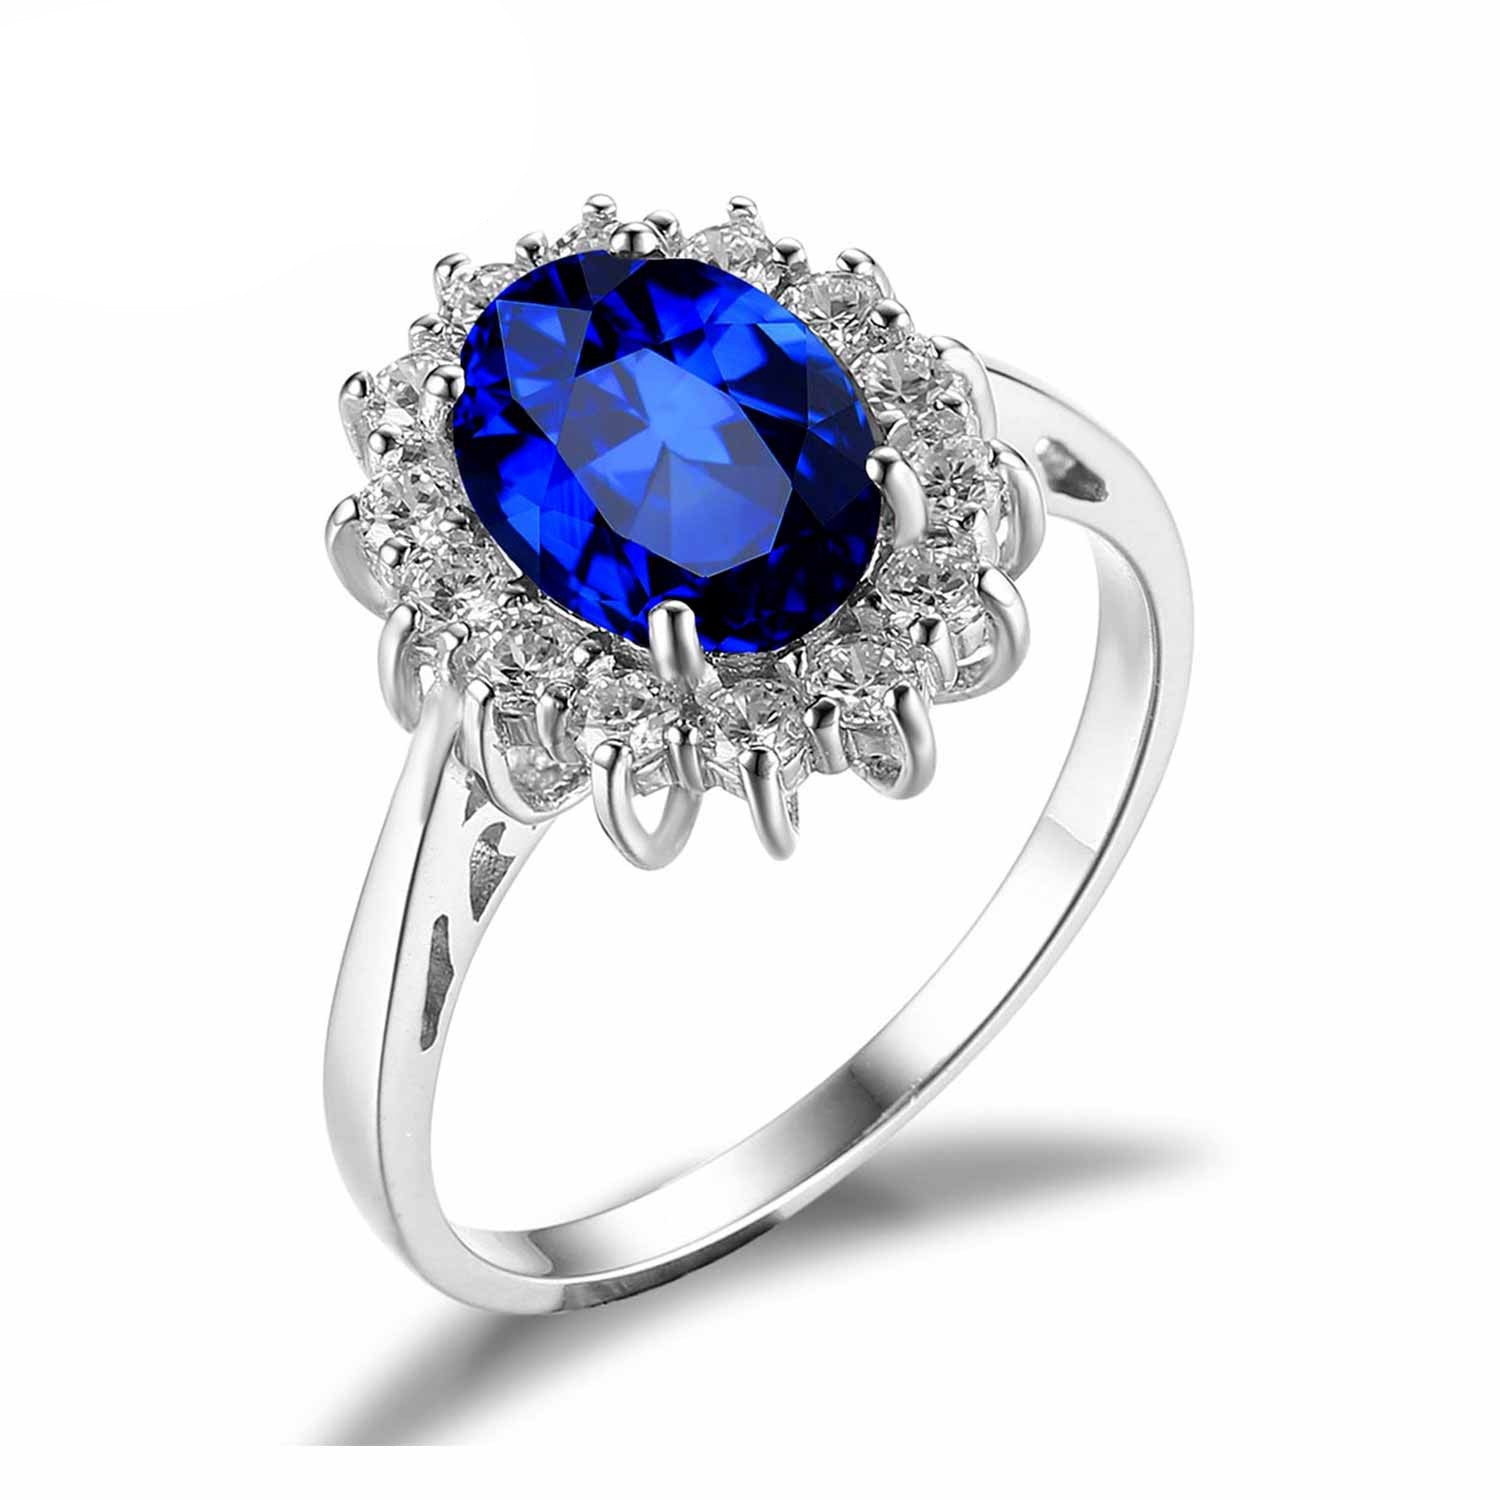 Princess Diana William Kate Middleton's 3.2ct Created Blue Sapphire Engagement 925 Sterling Silver Ring - CelebritystyleFashion.com.au online clothing shop australia